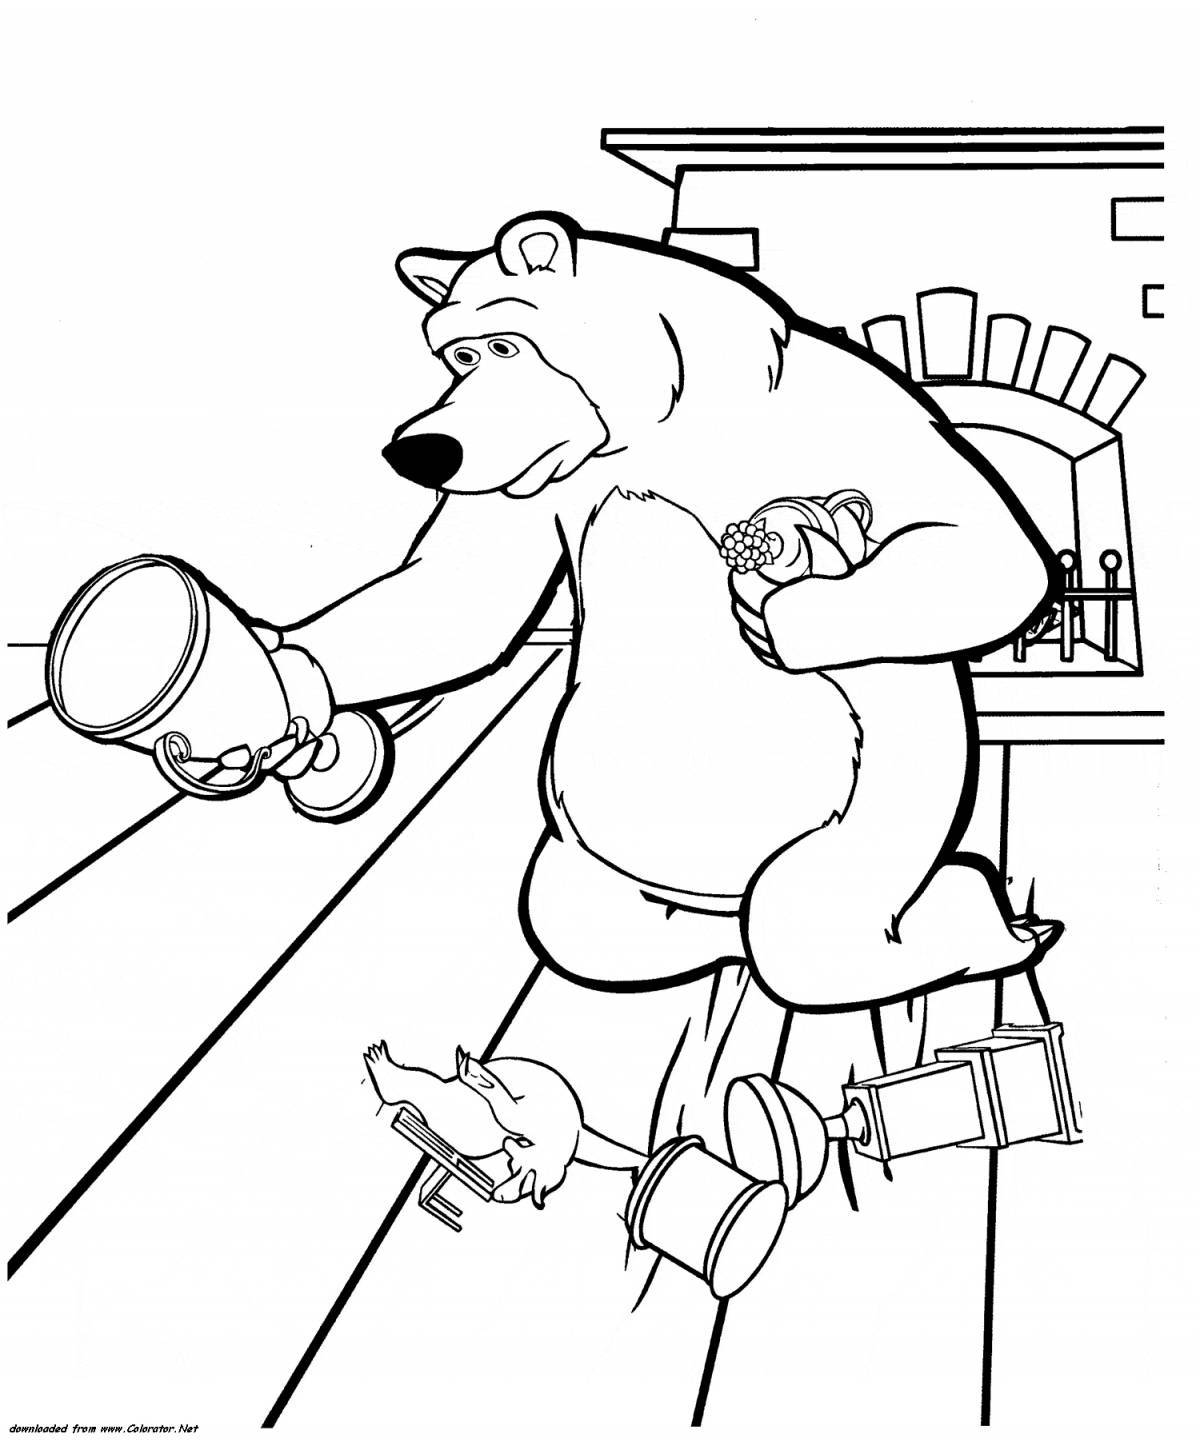 Masha and the bear coloring pages for kids